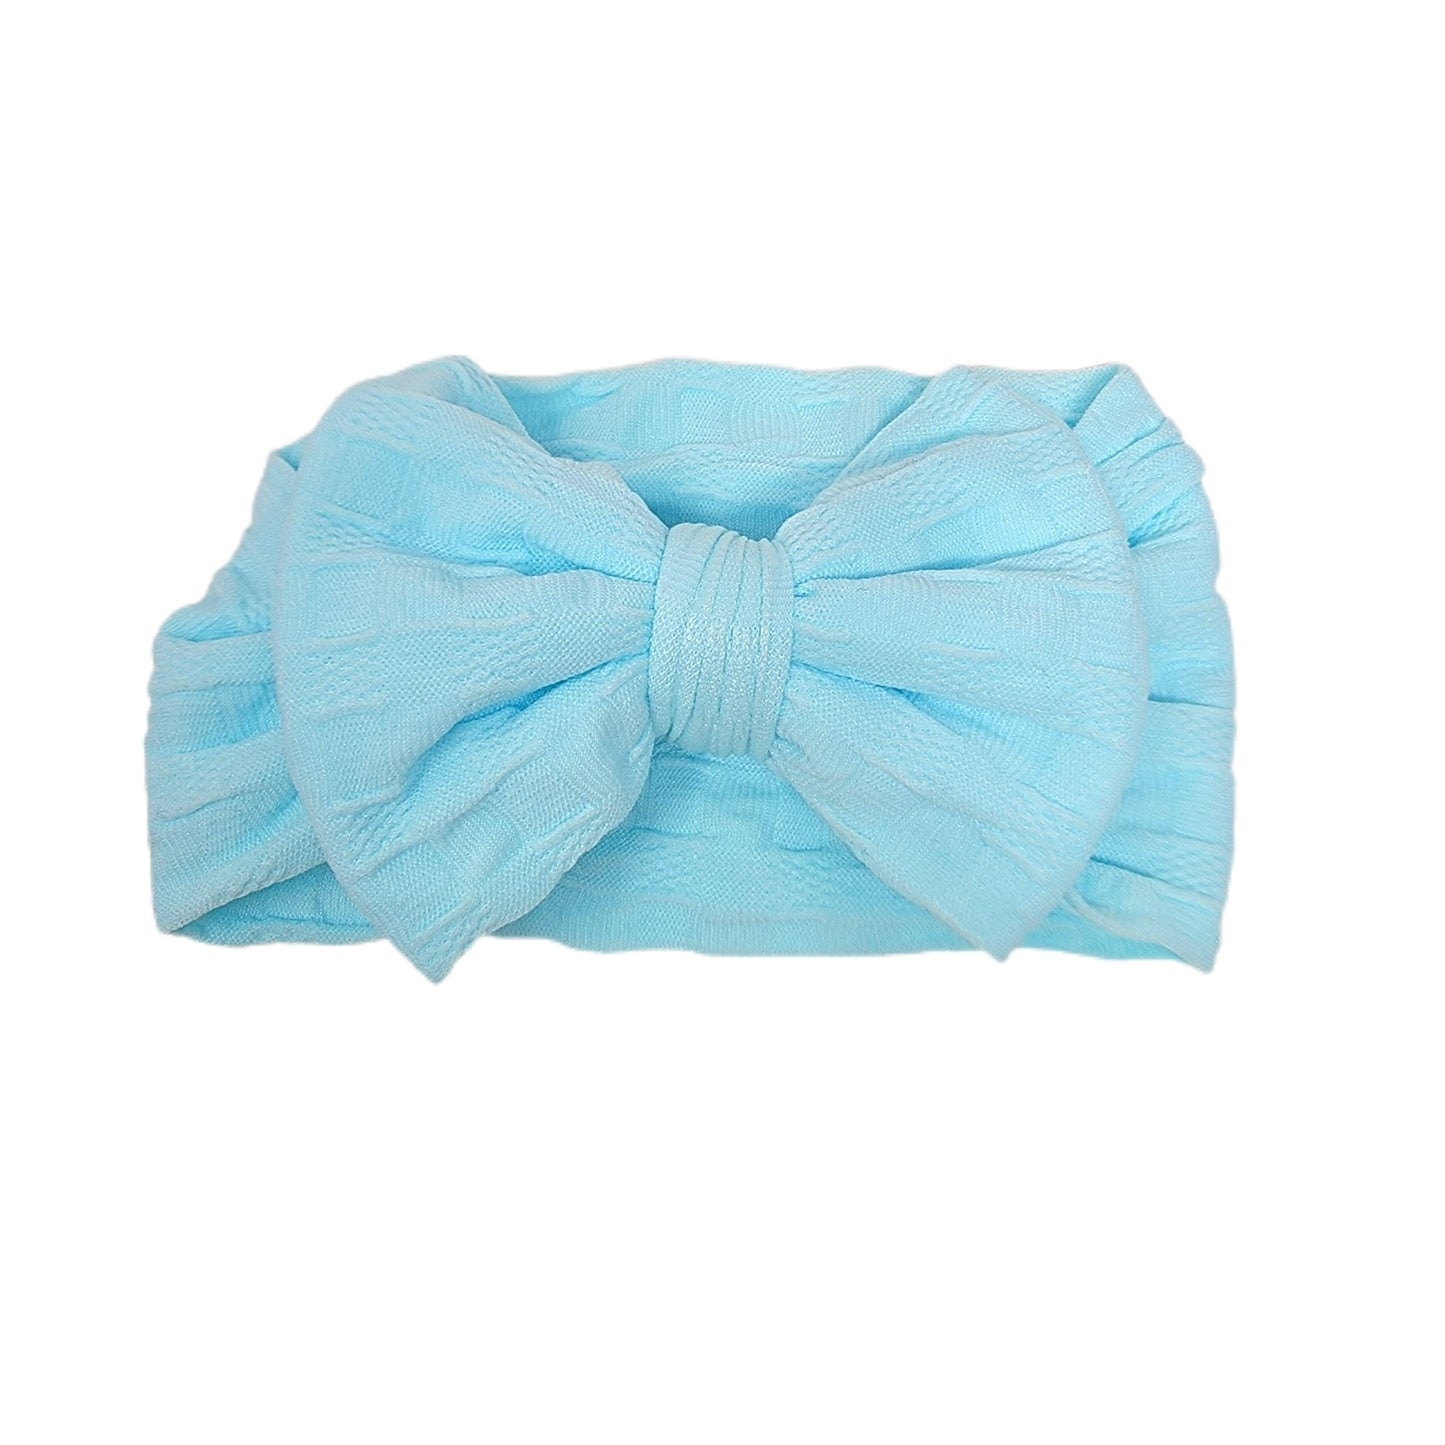 Baby Blue Woven Knit Fabric Headwrap 4" 